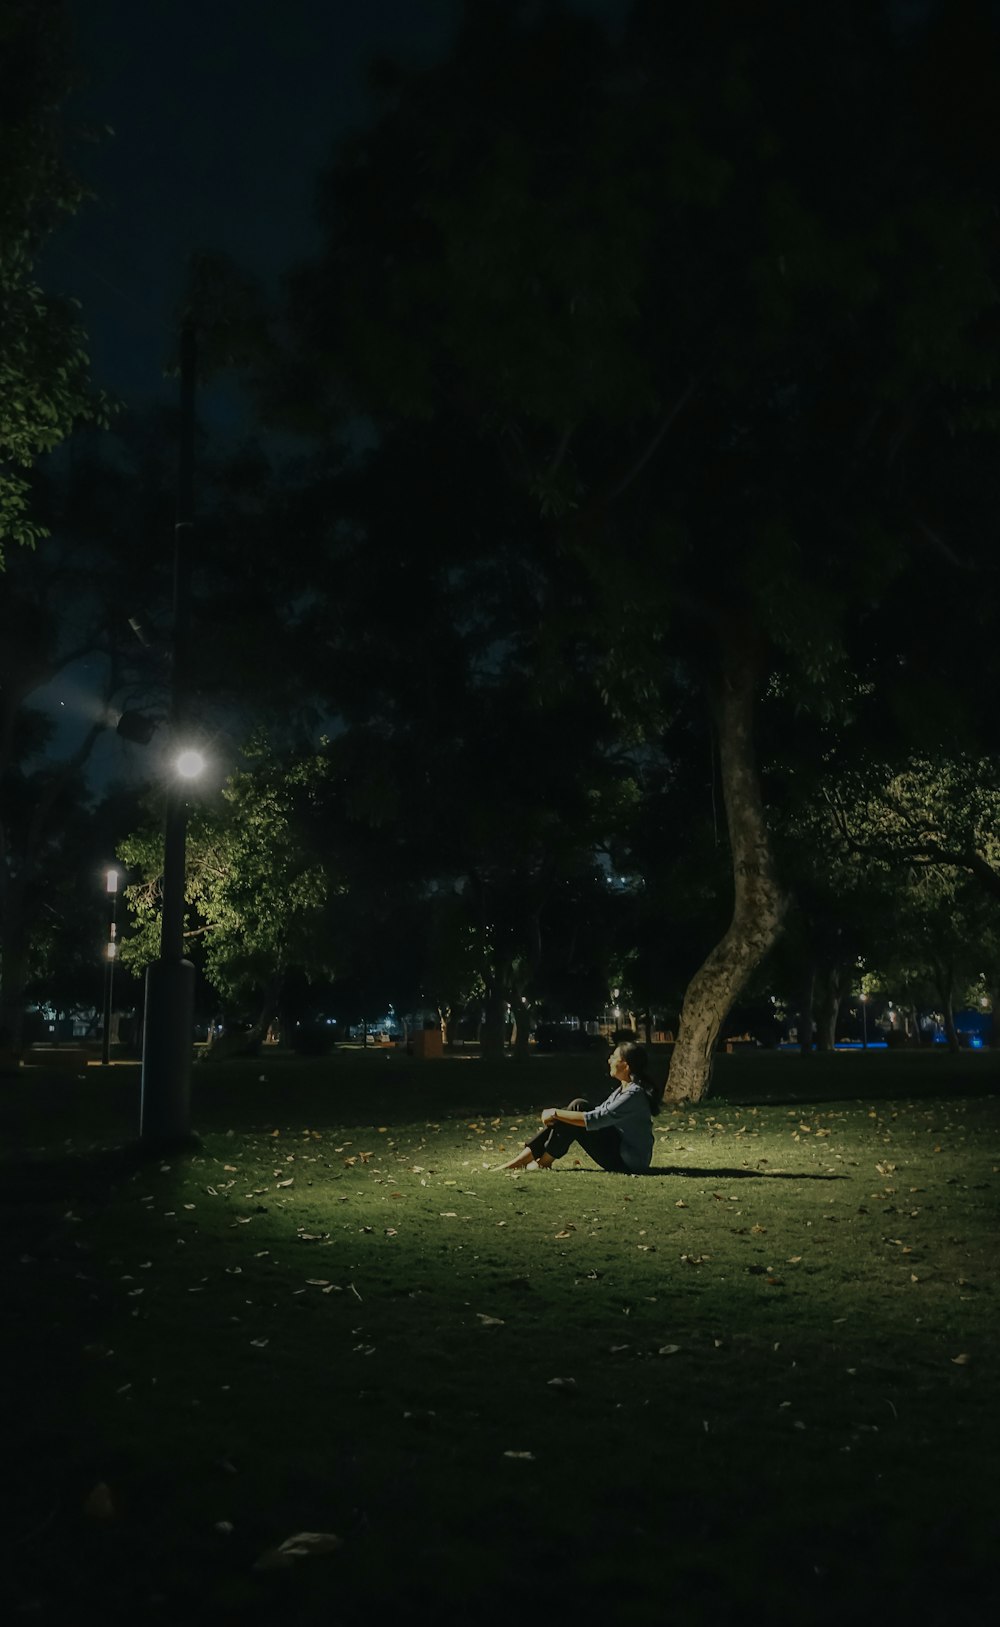 a person sitting on the ground under a tree at night